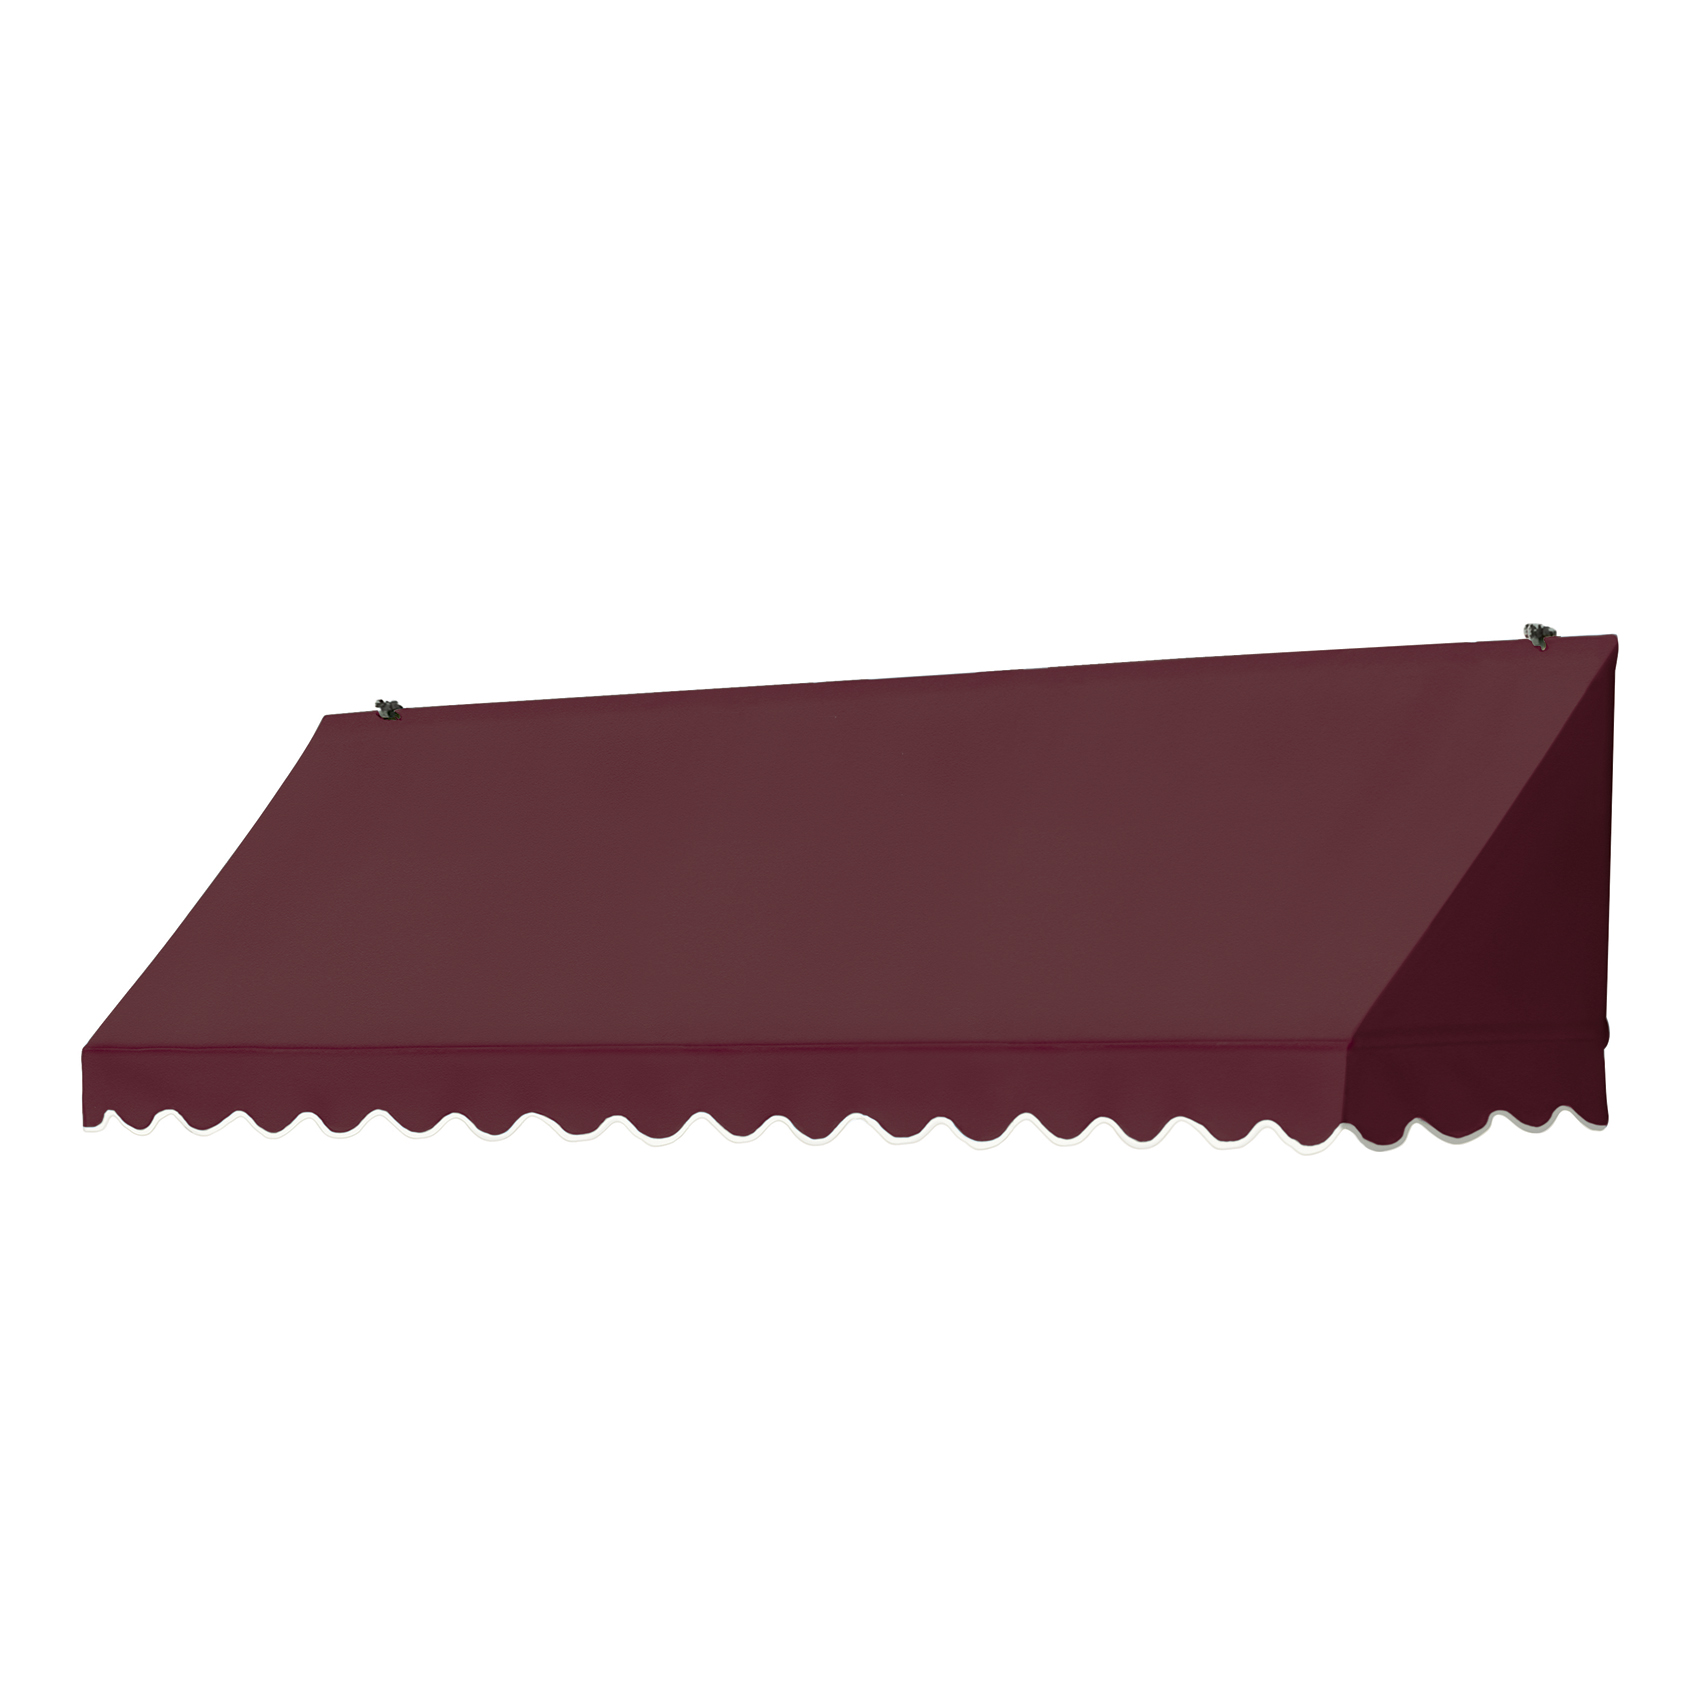 UPC 799870470517 product image for Coolaroo Awnings in a Box 8' Traditional Style Awning Replacement Cover in Assor | upcitemdb.com